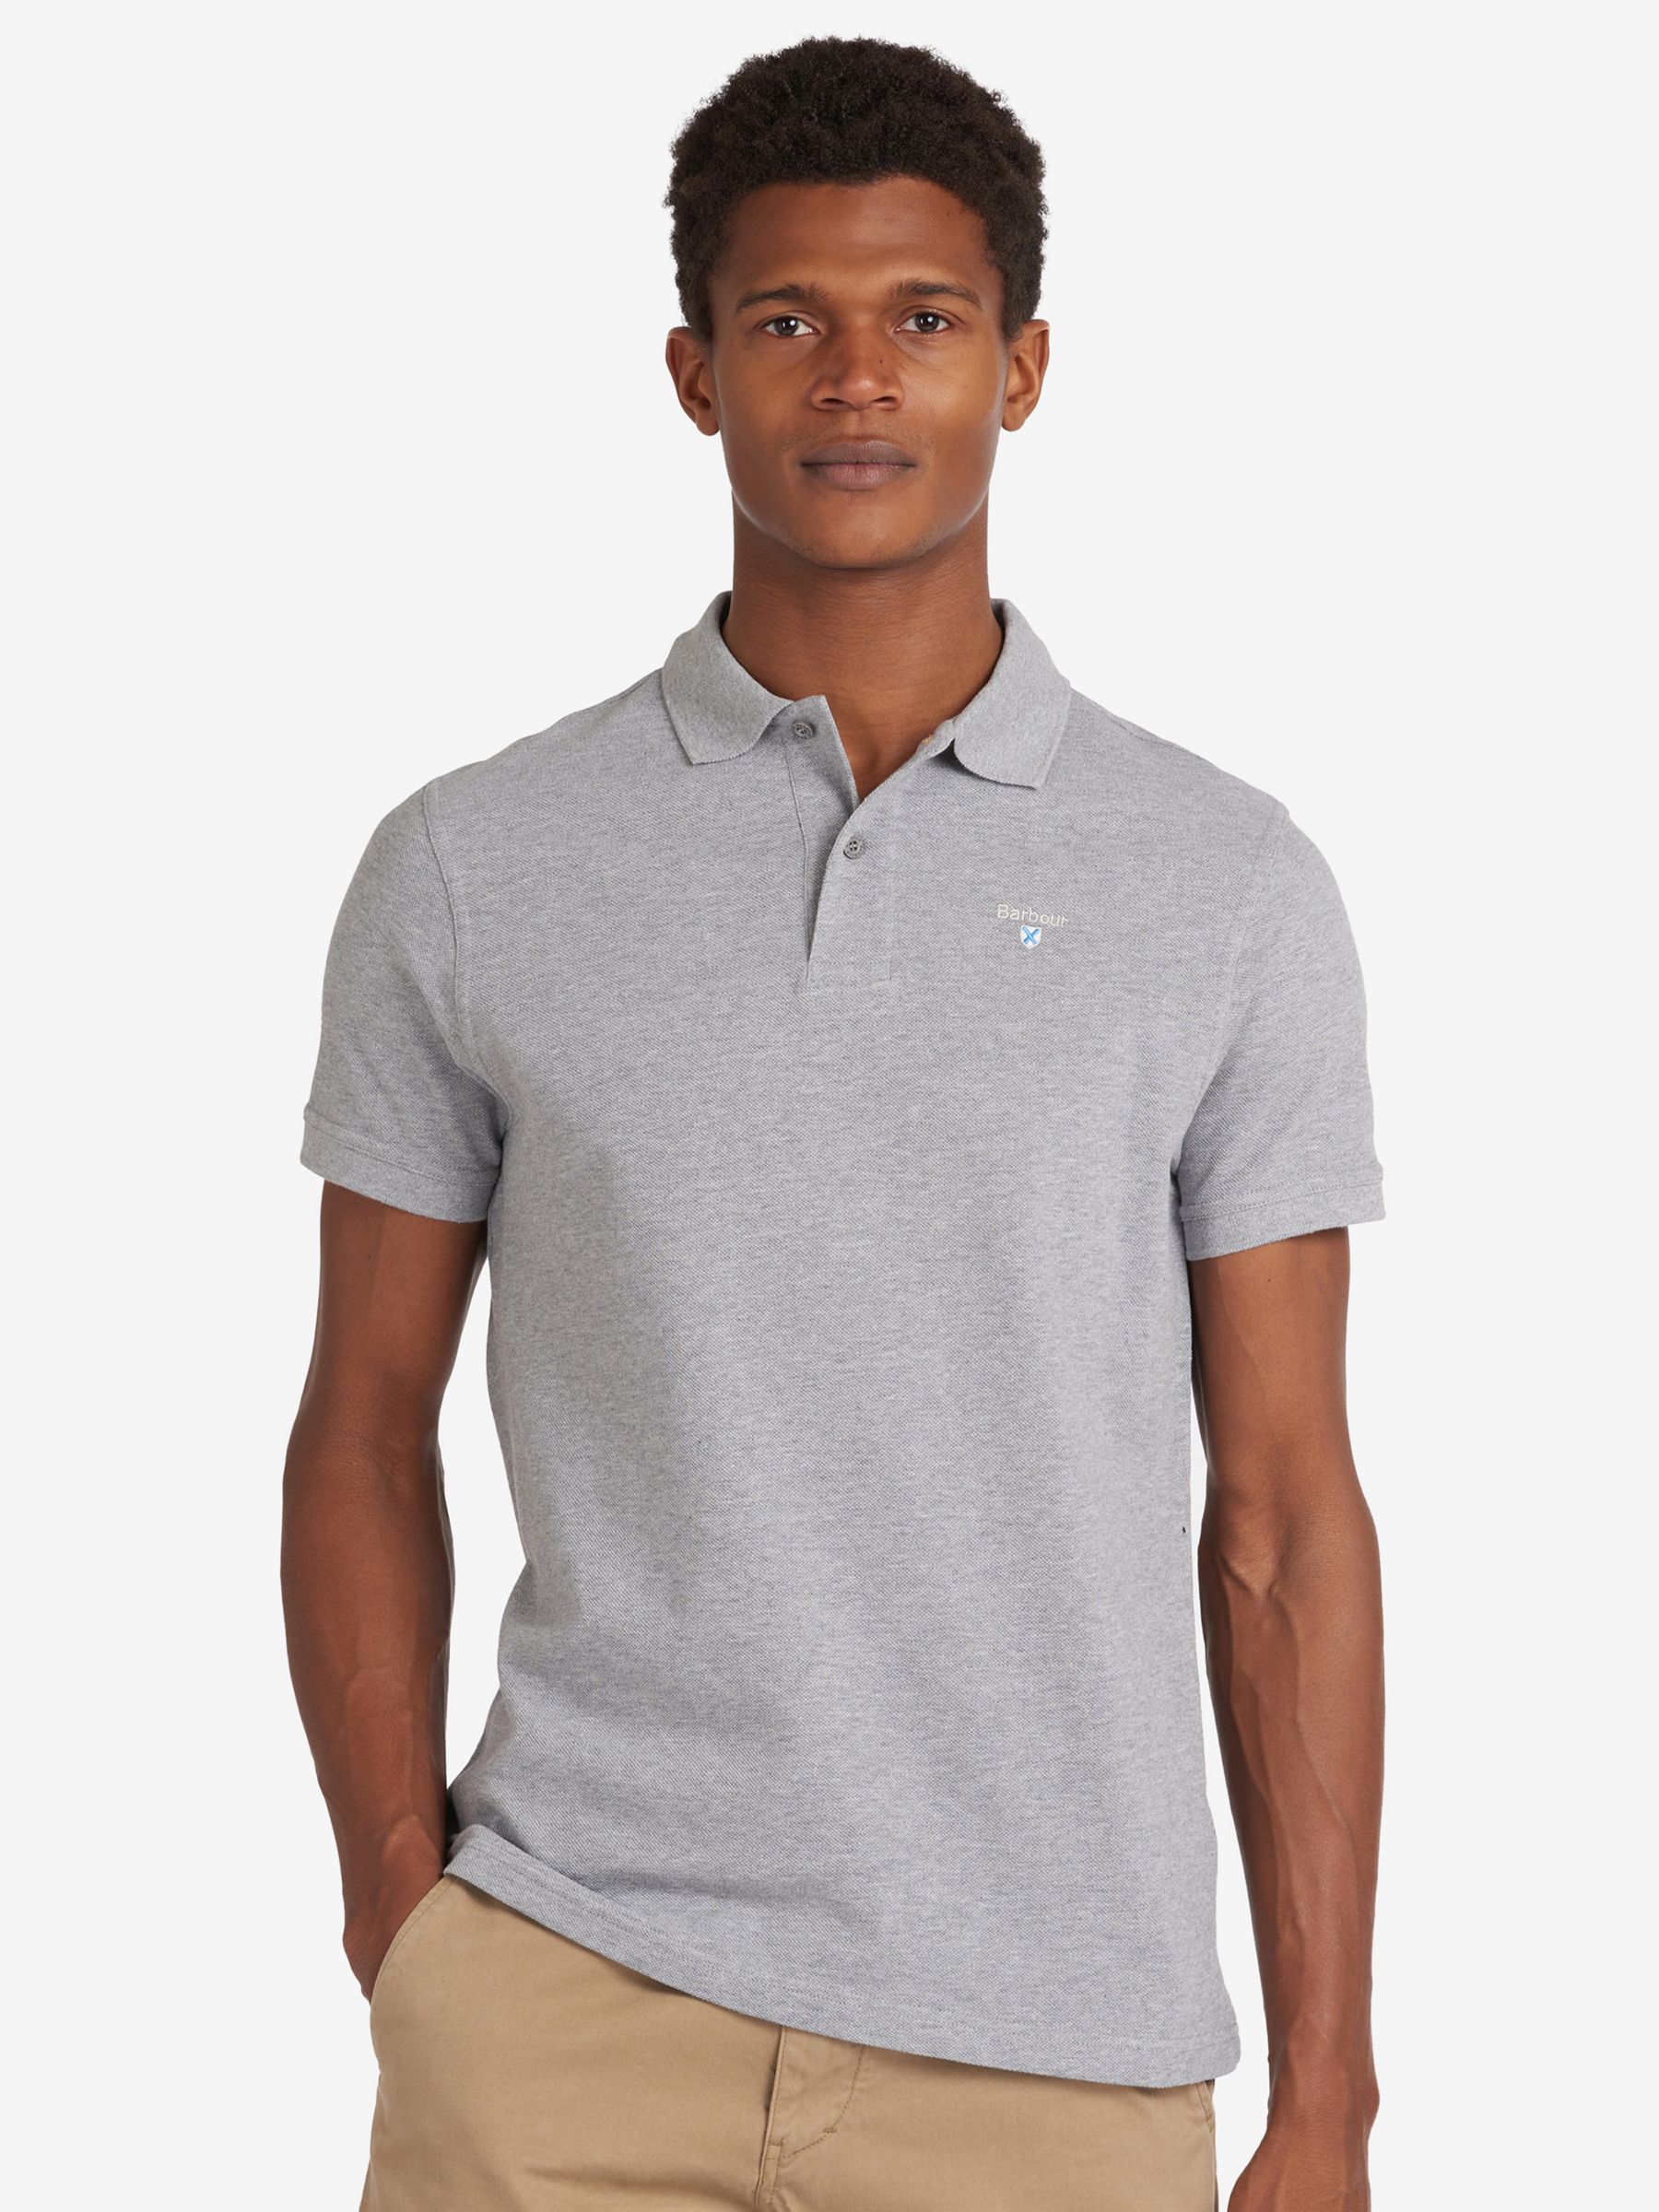 Barbour Short Sleeve Sports Polo Shirt, Grey Marl at John Lewis & Partners